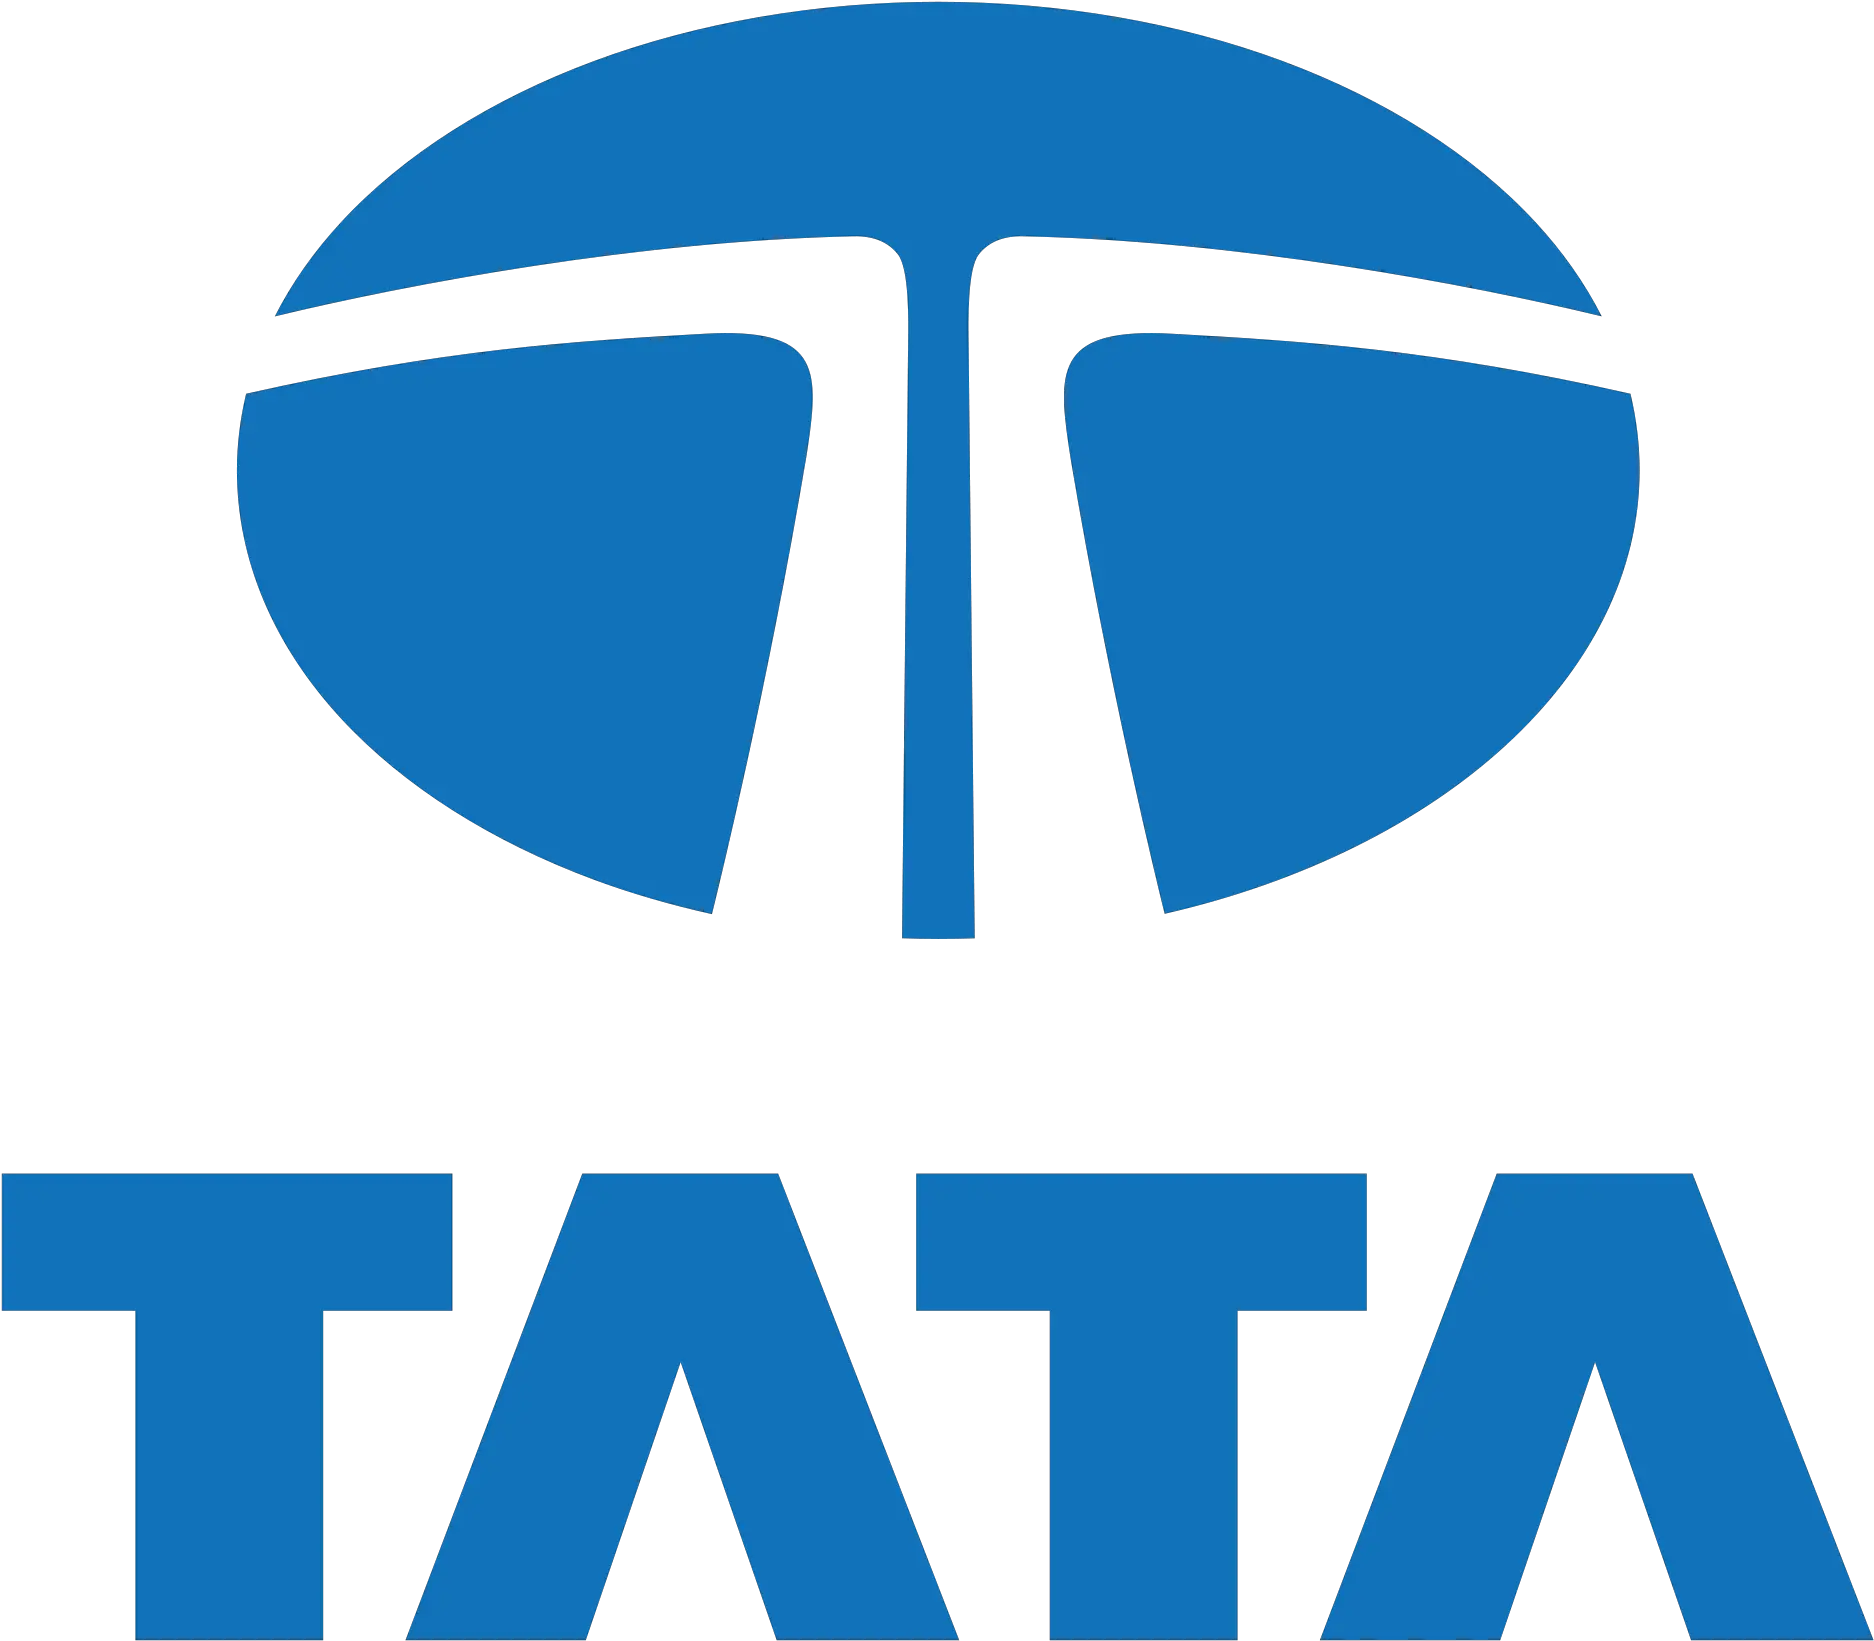 Tata Logo Hd Png Meaning Information Tata Vocal For Local Daewoo Logos